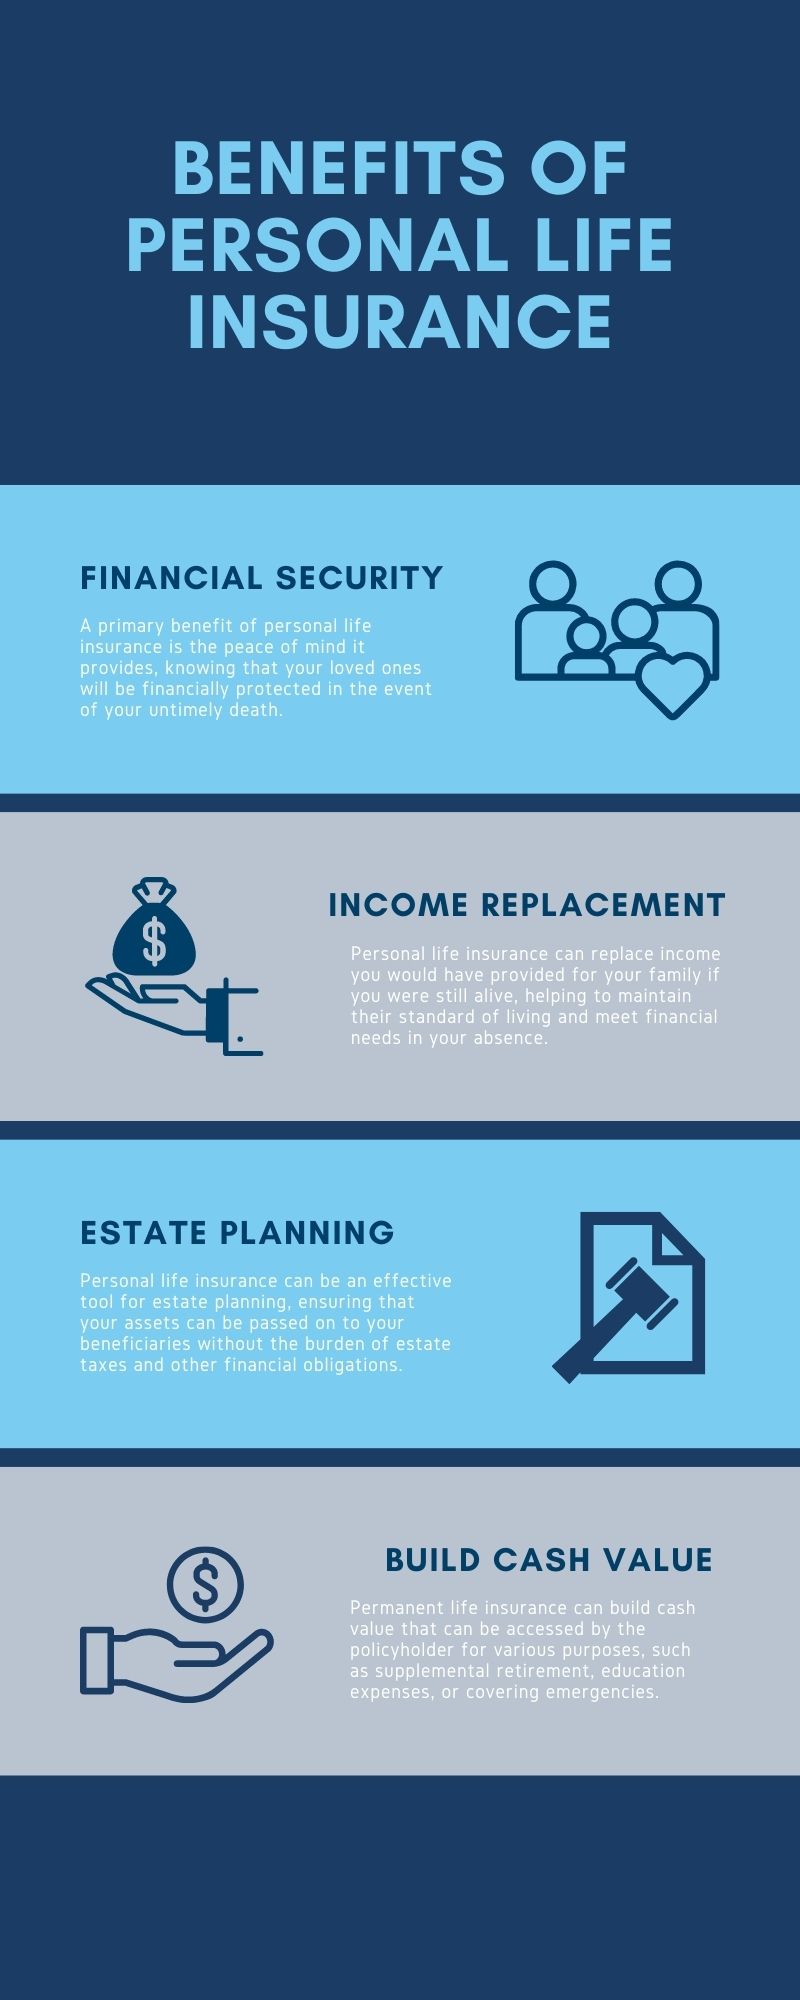 benefits of personal life insurance infographic